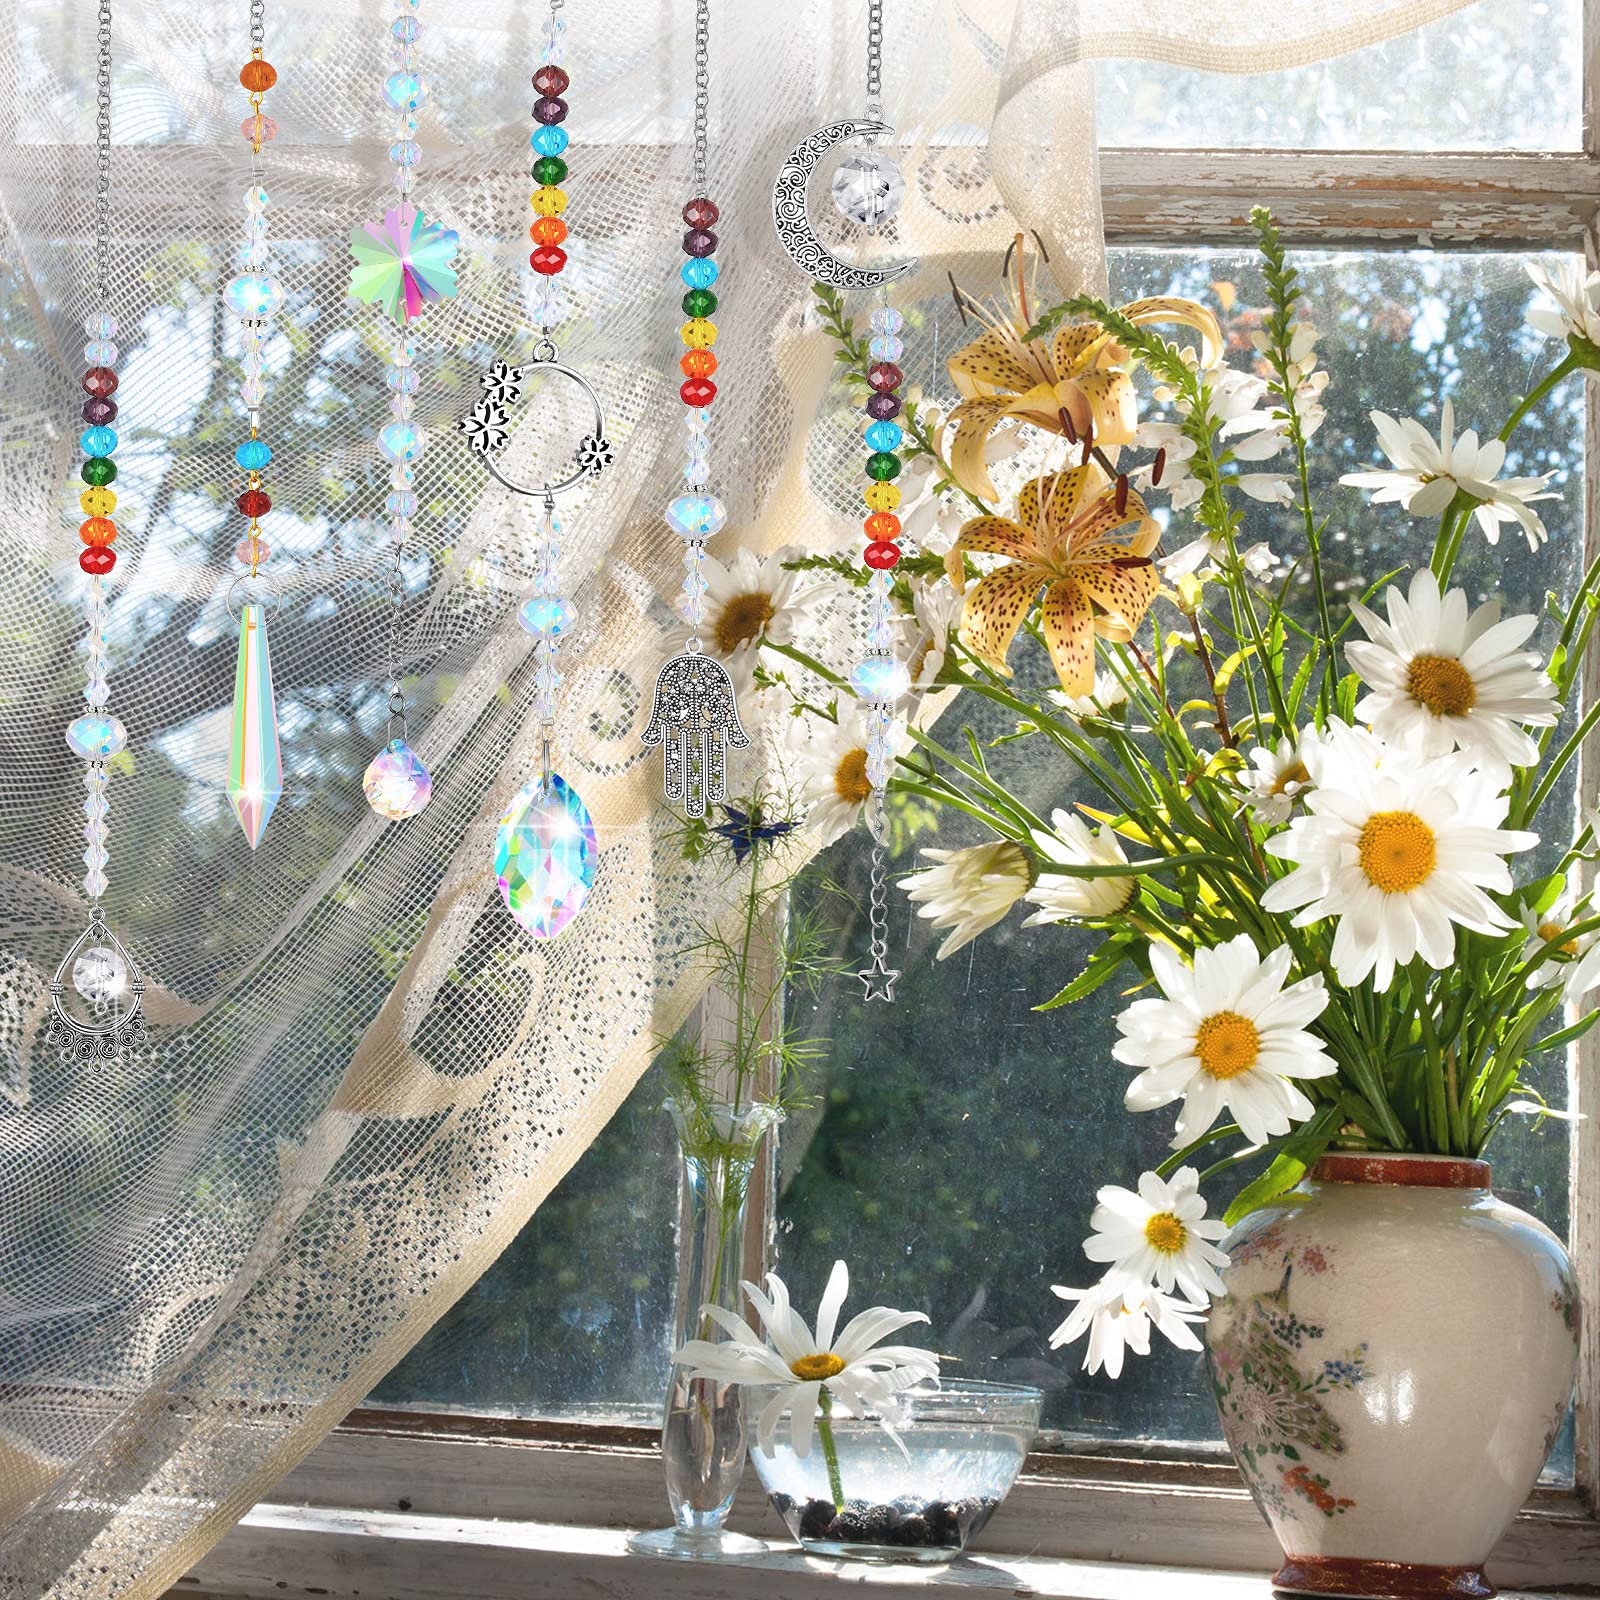 7 Pieces Sun Catcher Crystals Colorful Hanging Prism Suncatcher Window Ornament Beads Chain Sphere Chandelier Pendants for Home Wedding Gifts Decoration (Fresh)